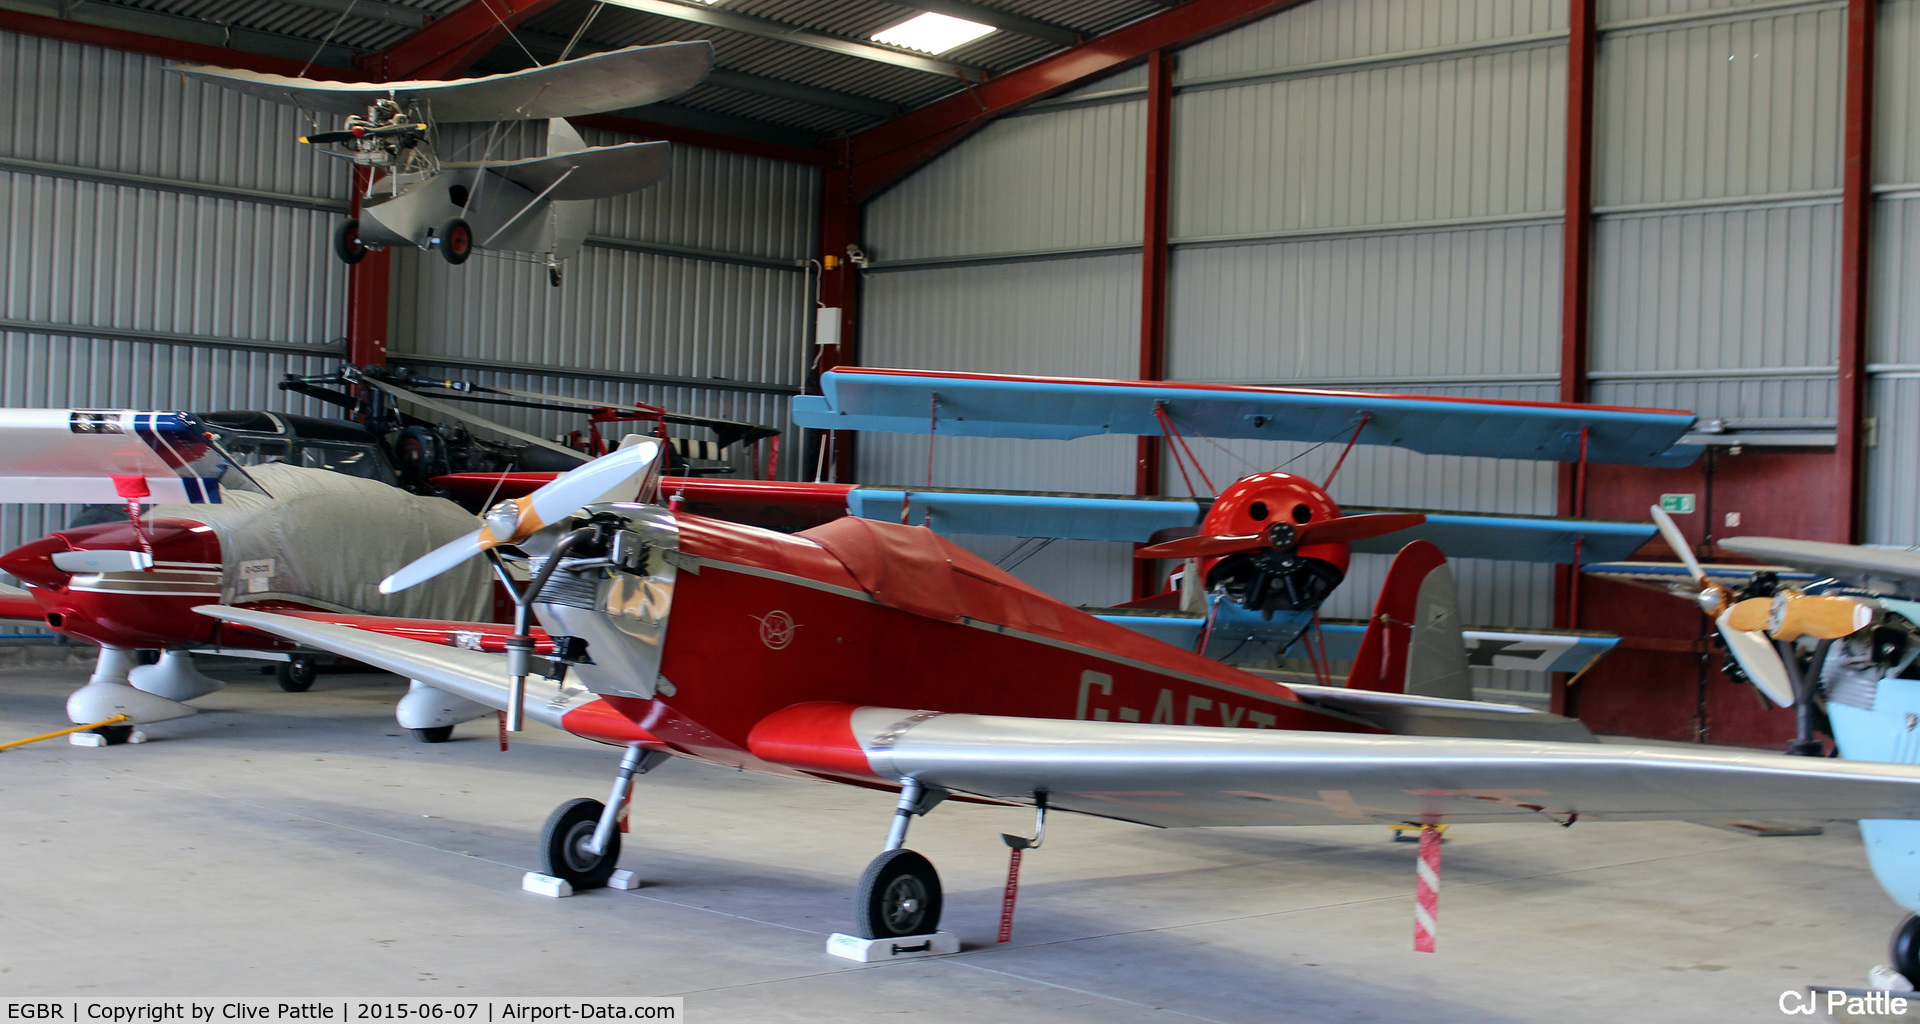 EGBR Airport - Radial Fly-in day packed hangar view at Breighton, Yorks - EGBR